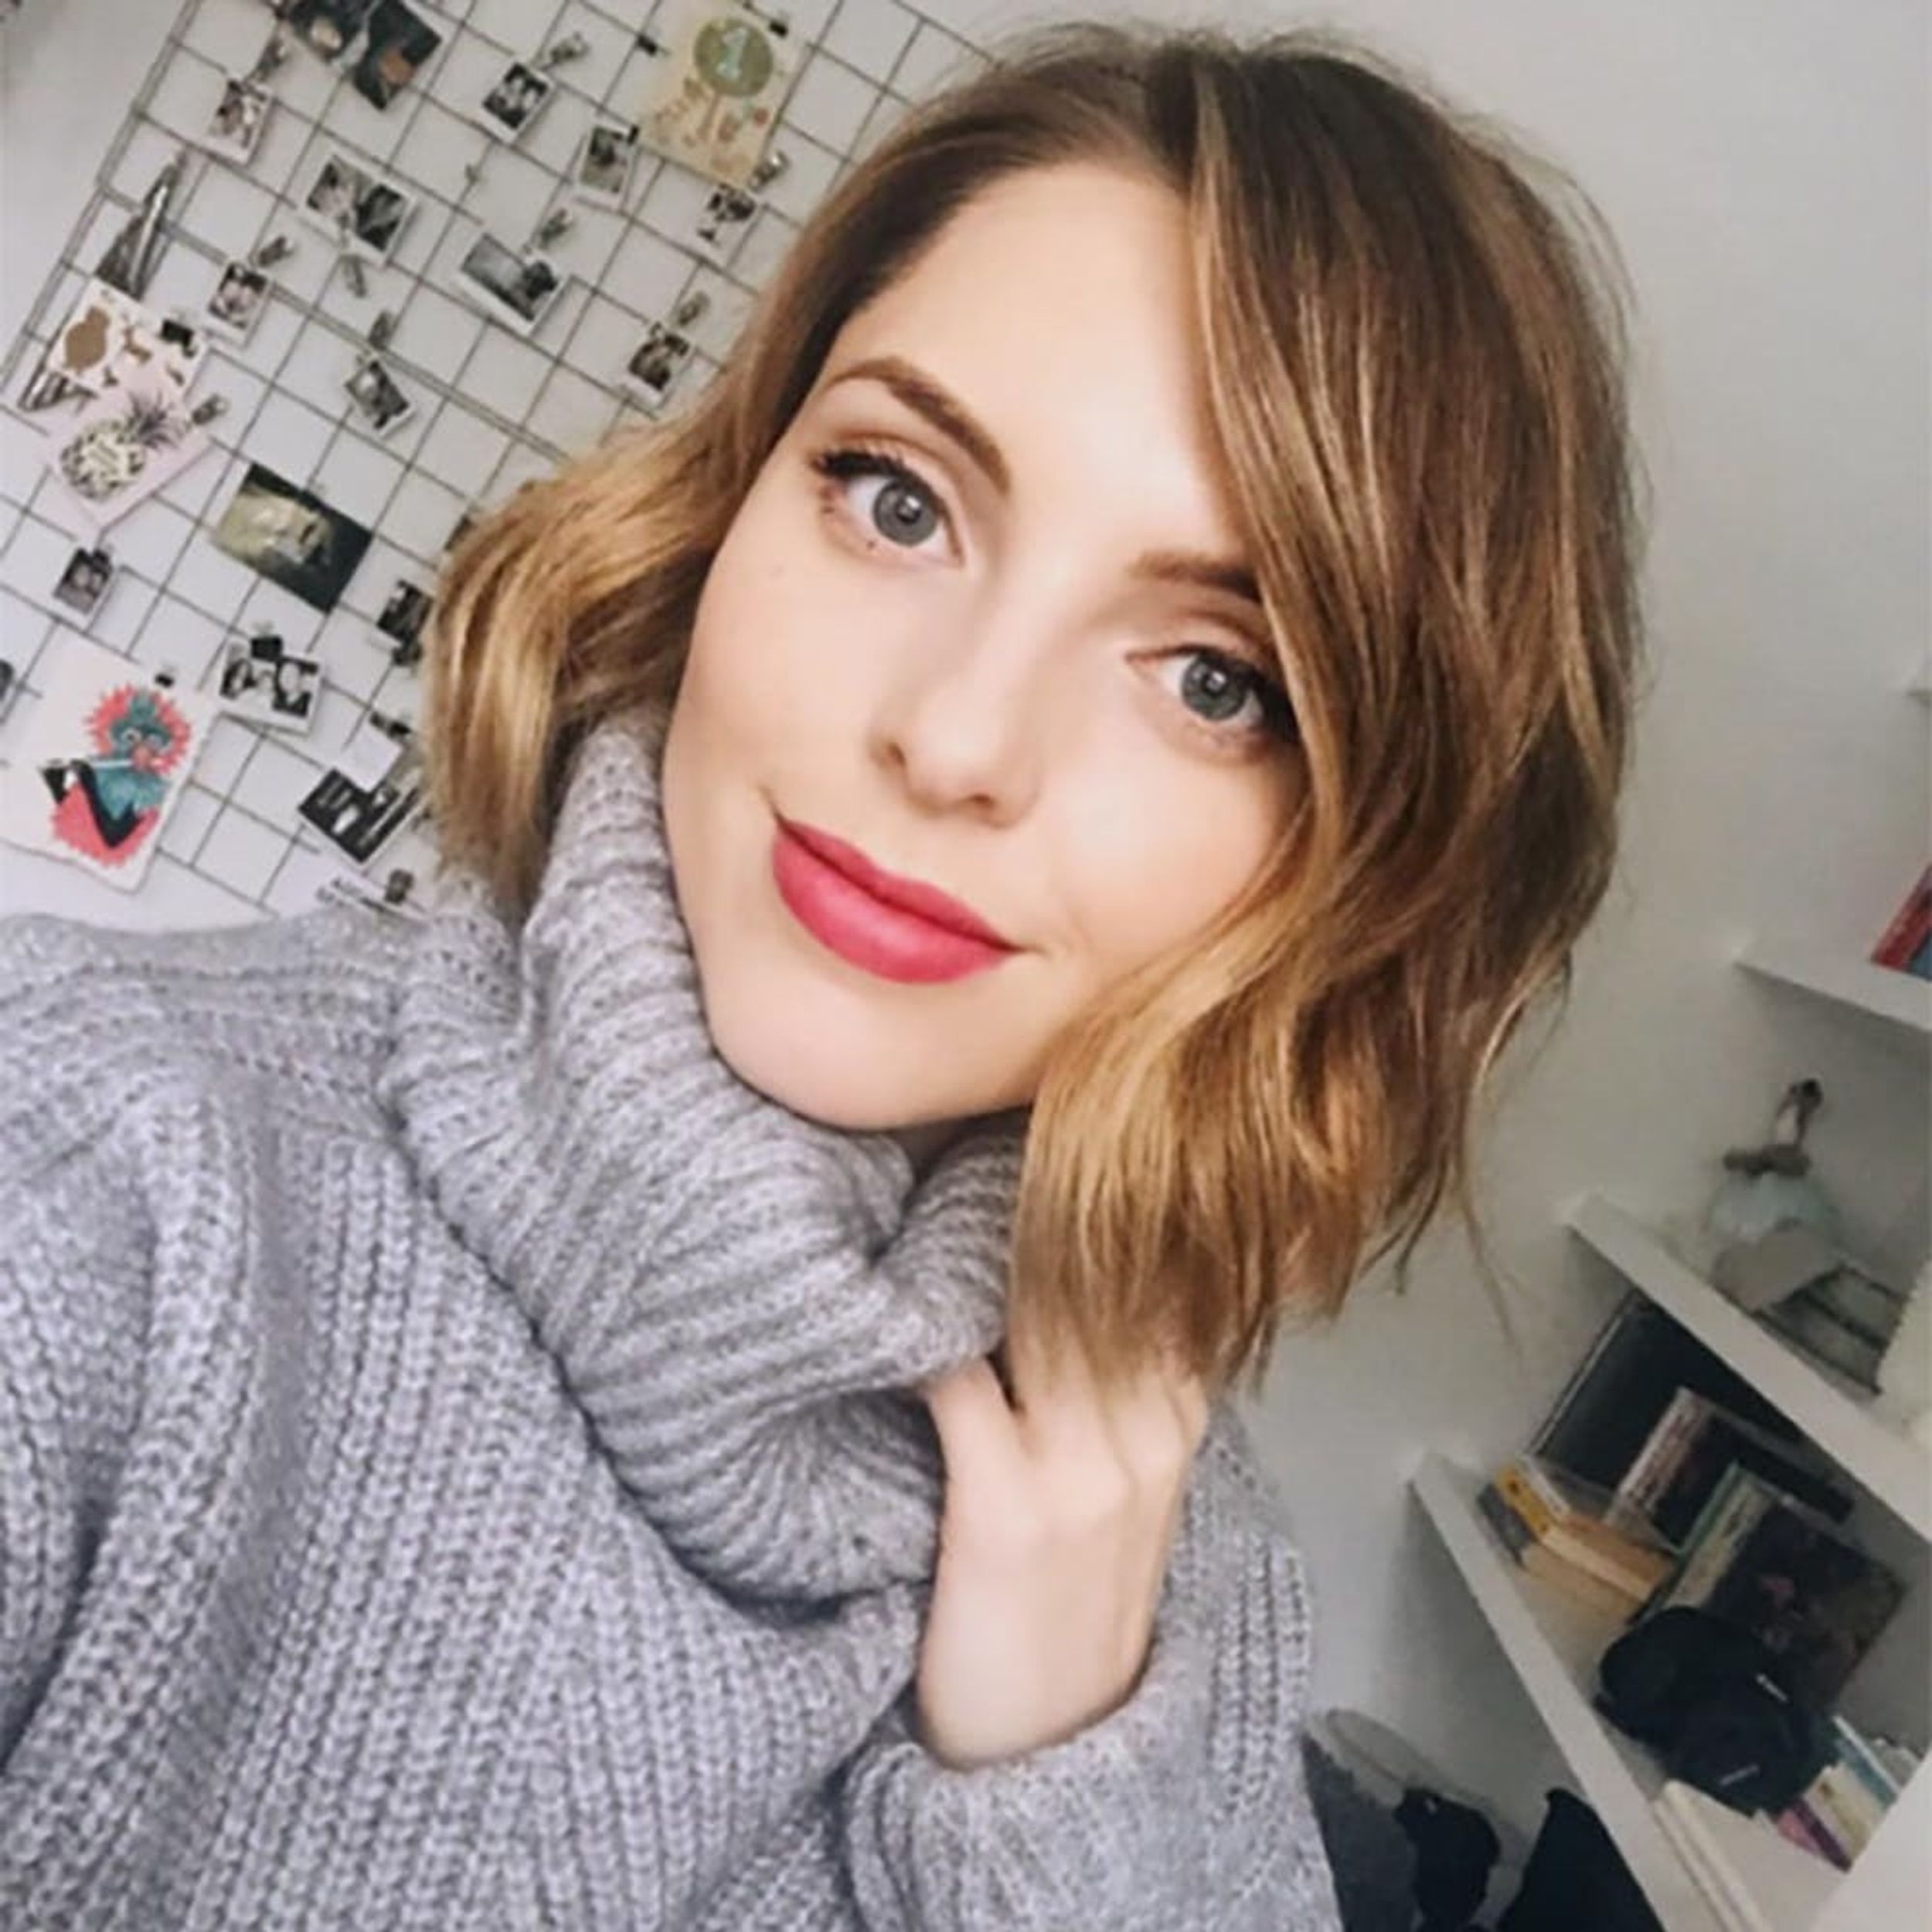 14 Instababes Who Will Make You Rethink Your Hair Color for the Winter